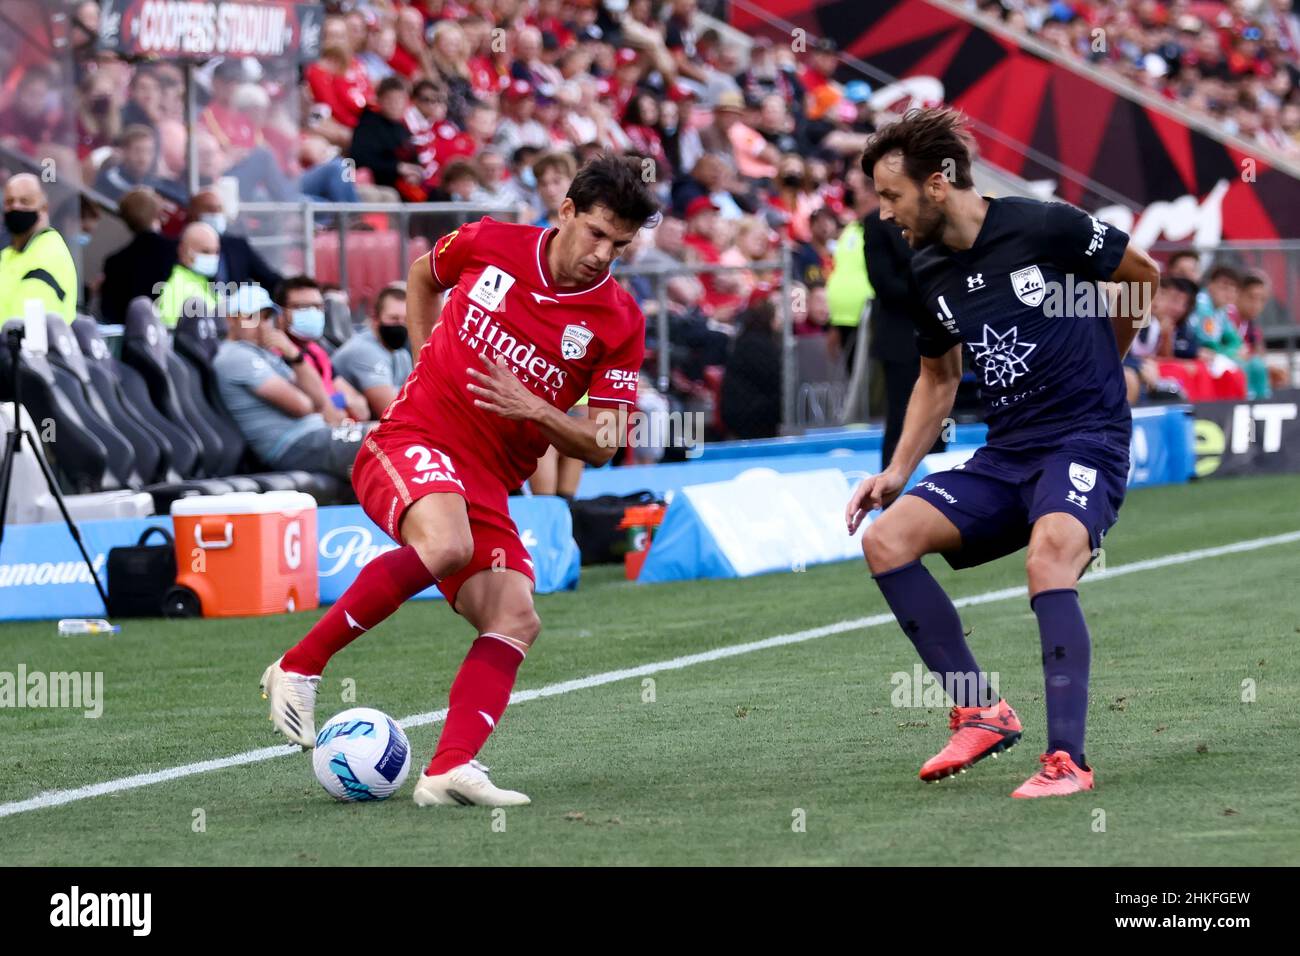 Adelaide, Australia, 4 February, 2022. Javier López Rodriguez of Adelaide United kicks the ball during the A-League soccer match between Adelaide United and Sydney FC. Credit: Peter Mundy/Speed Media/Alamy Live News Stock Photo